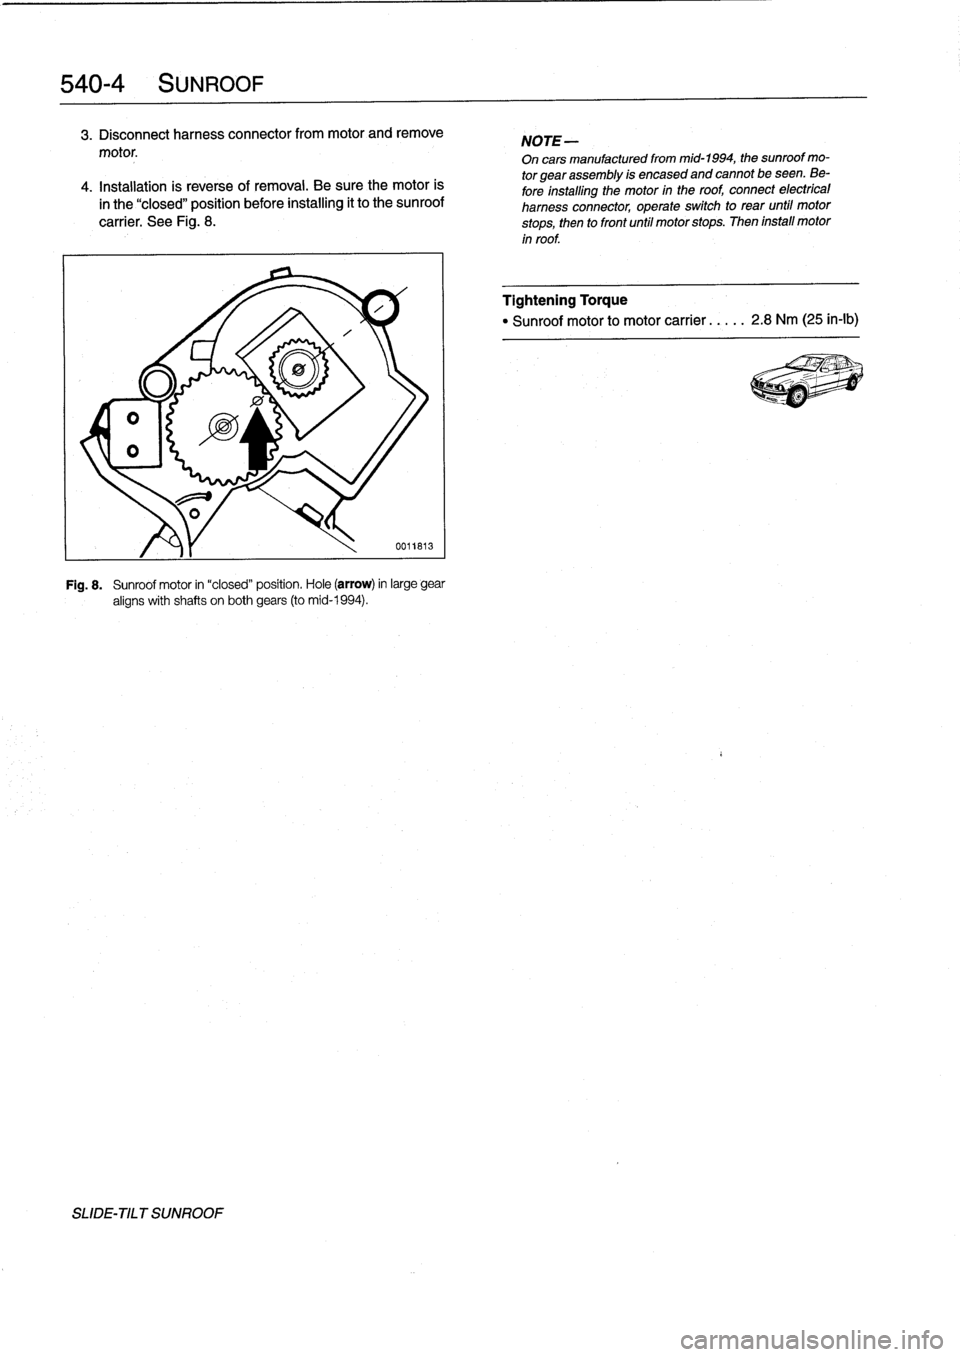 BMW 318i 1994 E36 Workshop Manual 
540-
4
SUNROOF

3
.
Disconnect
harness
connector
from
motor
and
remove

motor
.

4
.
Installation
is
reverse
of
removal
.
Be
sure
the
motor
is
in
the
"closed"
position
before
installing
it
to
the
sun